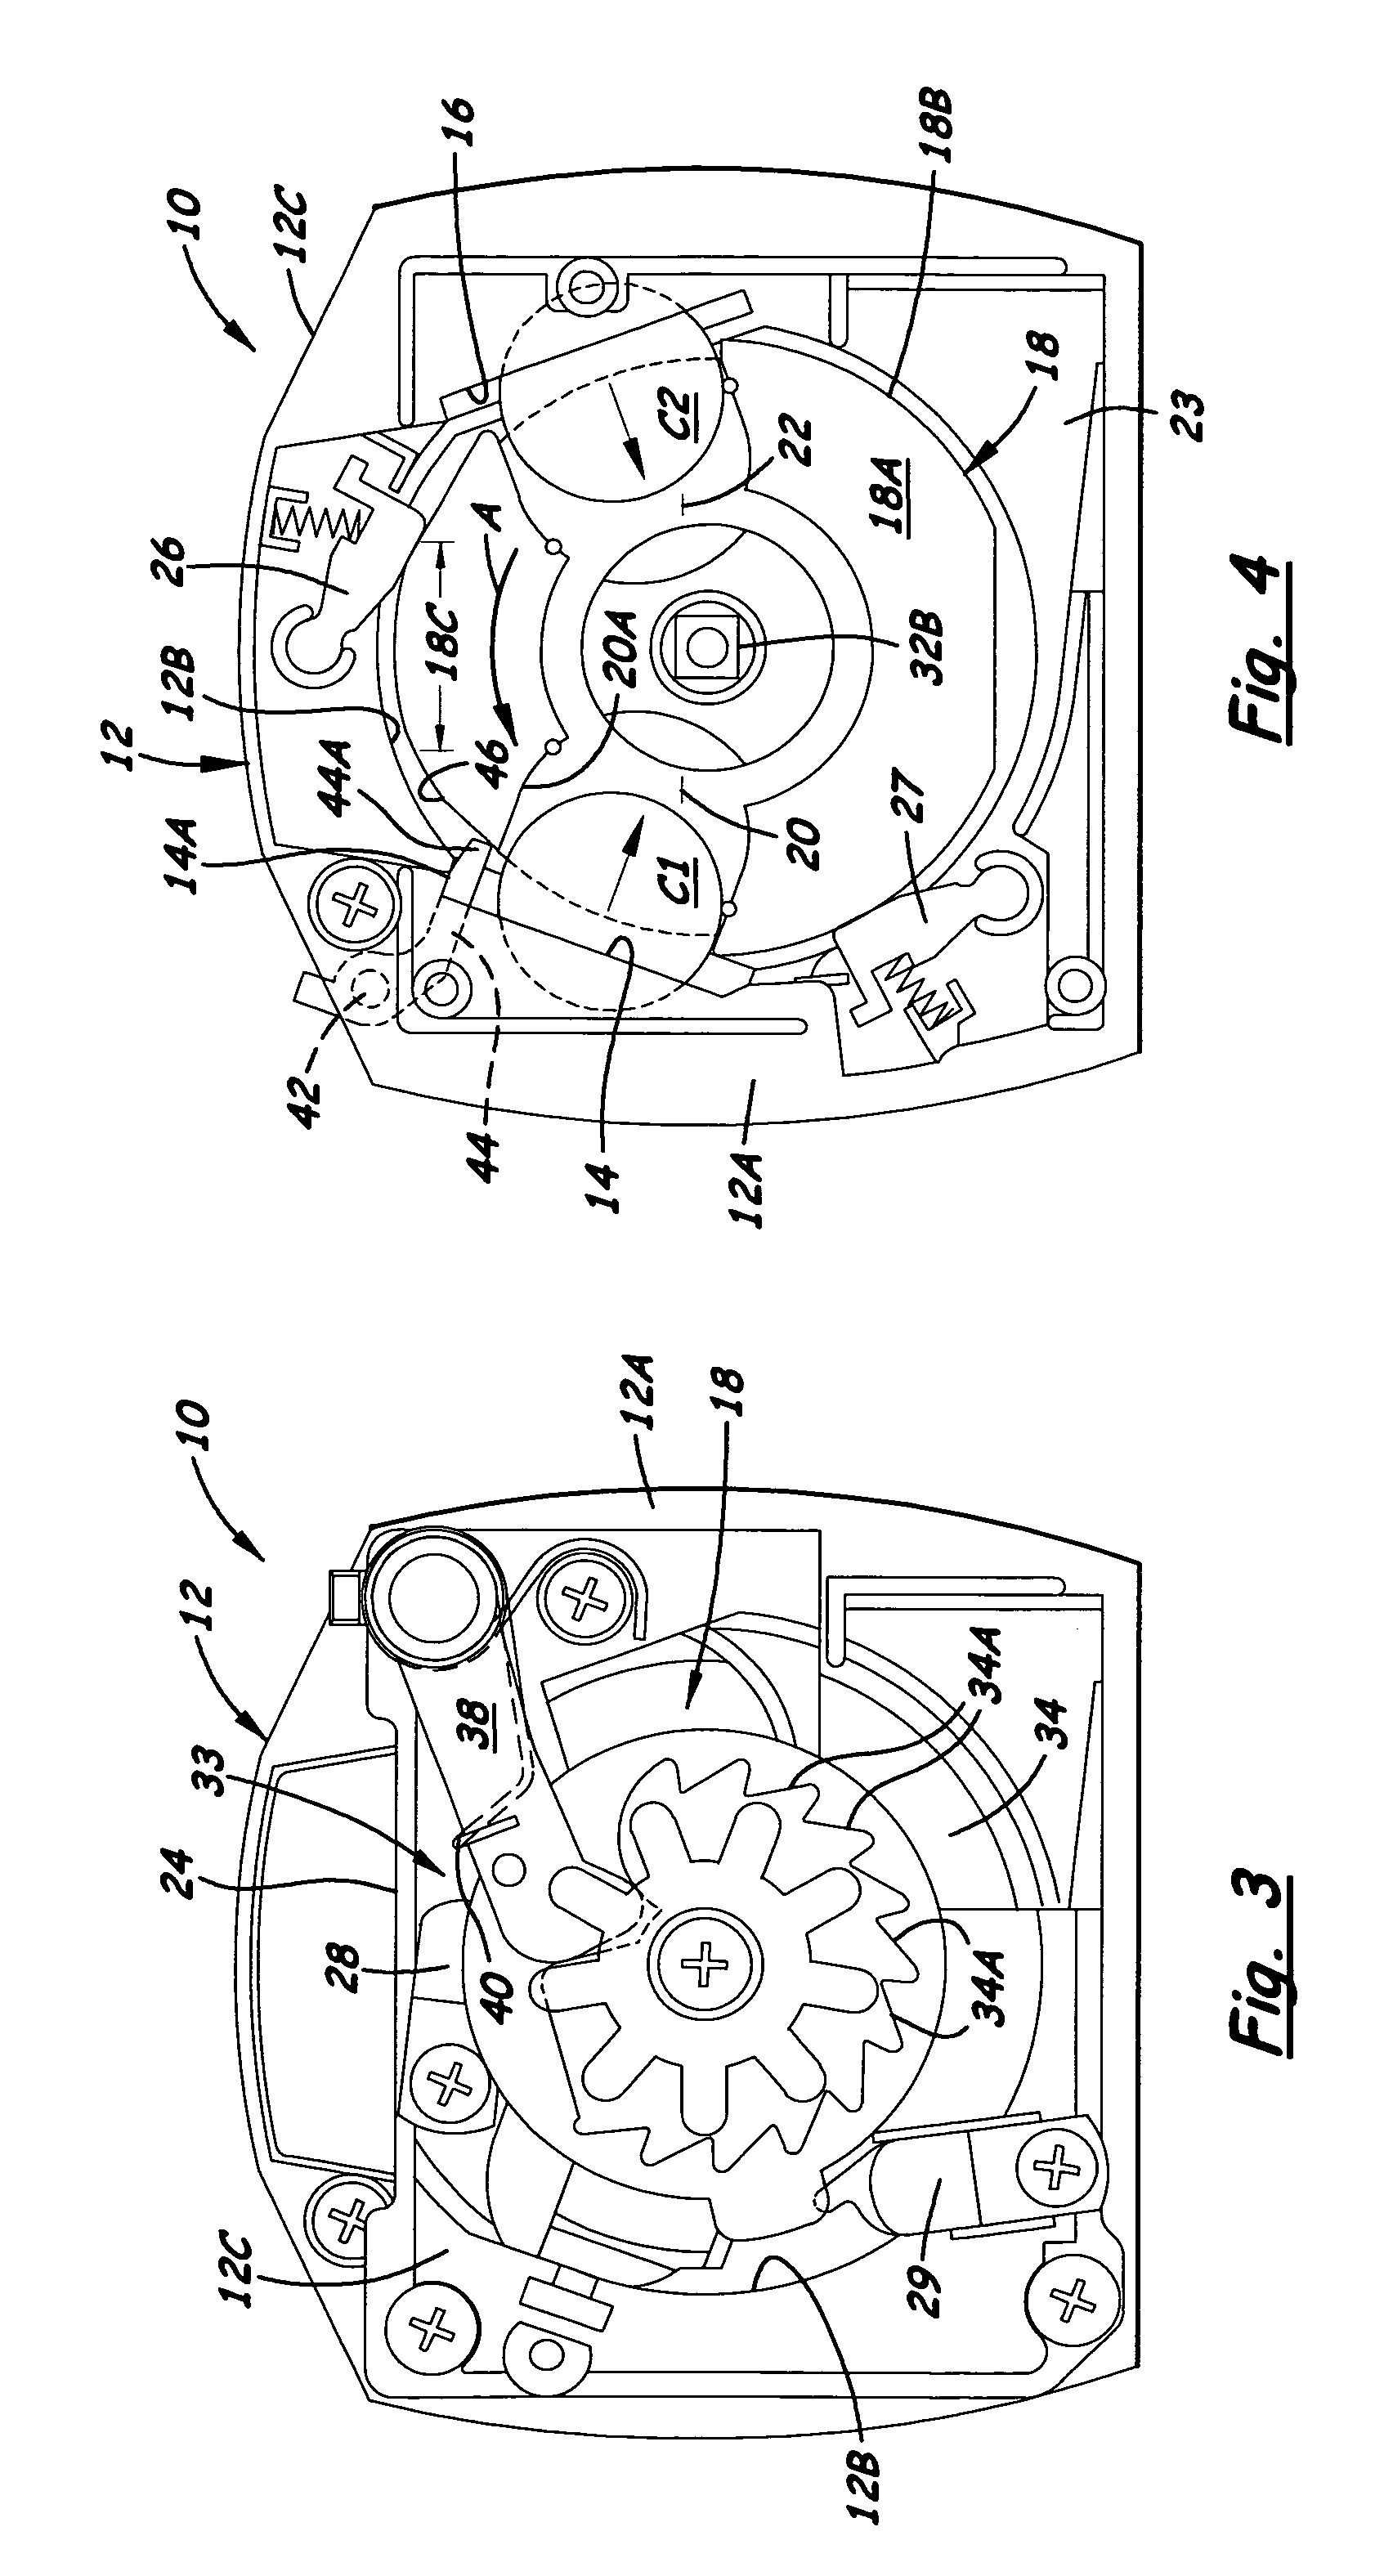 Multiple coin actuation mechanism having pivotal latch preventing coin removal from carrier wheel recess